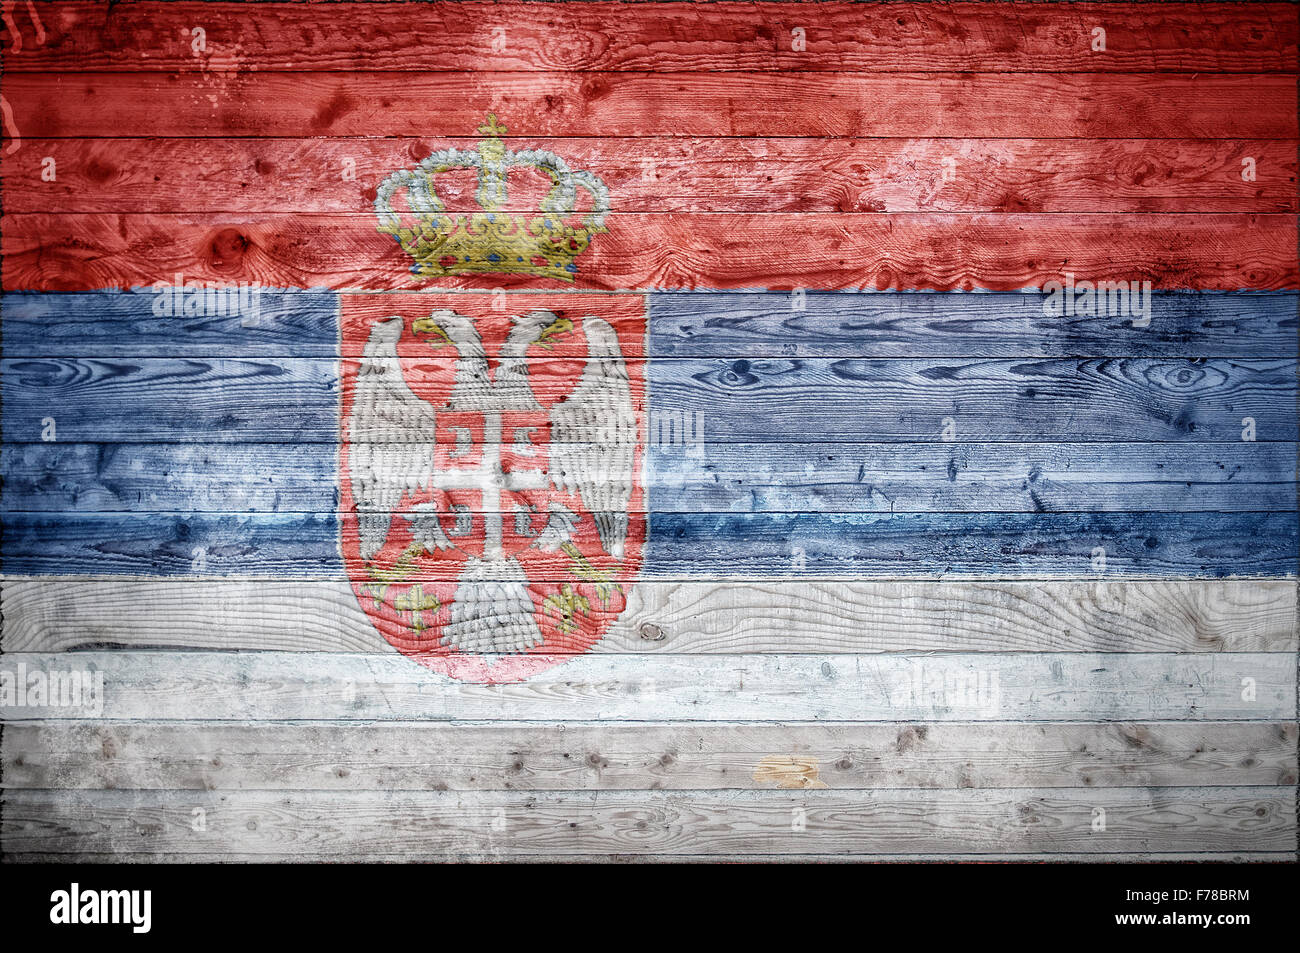 A vignetted background image of the flag of Serbia onto wooden boards of a wall or floor. Stock Photo